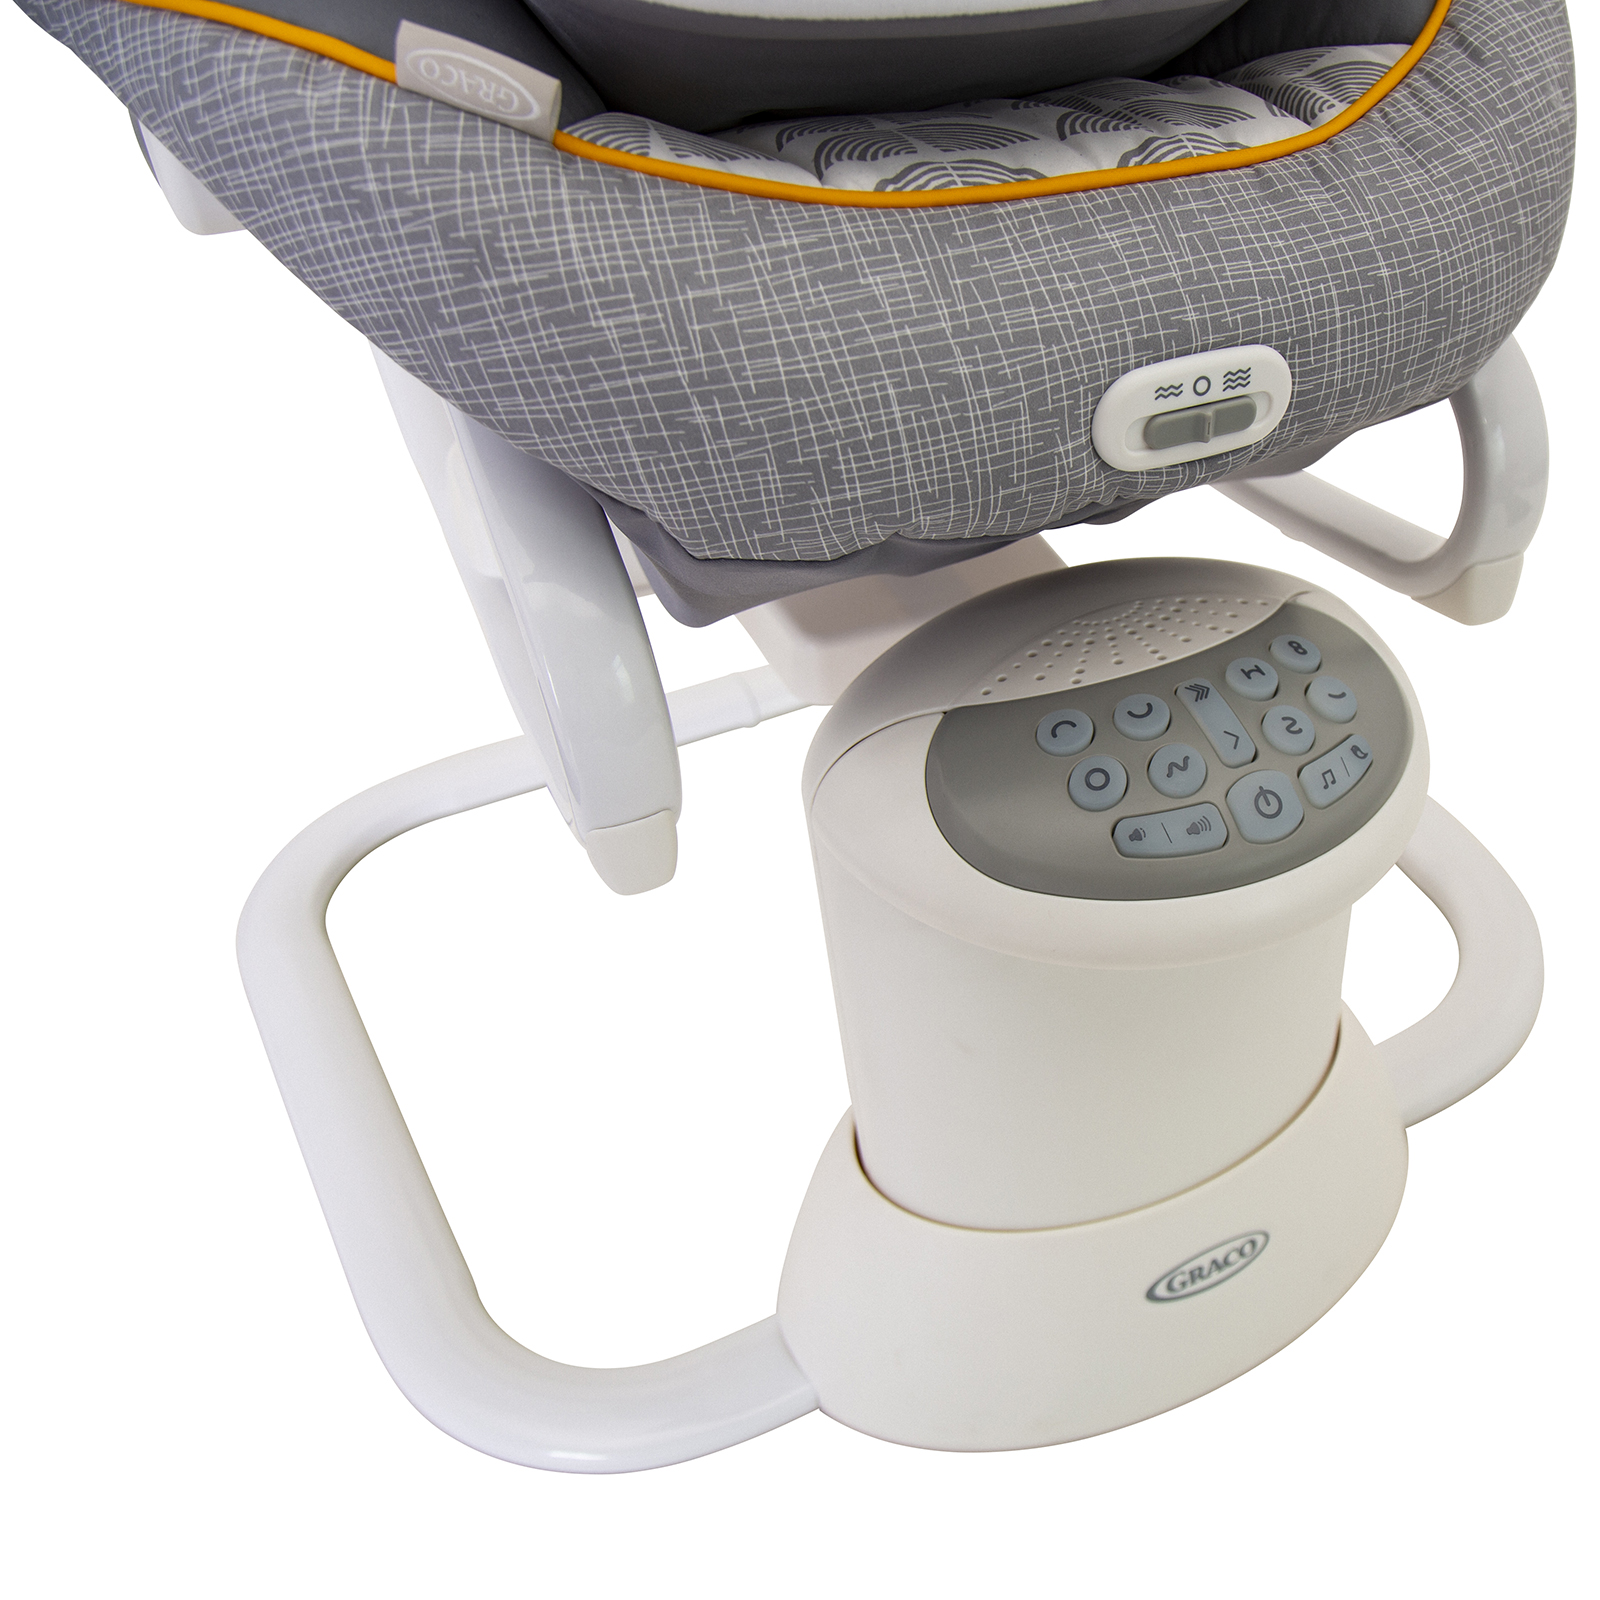 Graco All Ways Vibration Online4baby Horizon – Buy Musical & Grey / | Soother Sounds at 2in1 with Rocker Swing